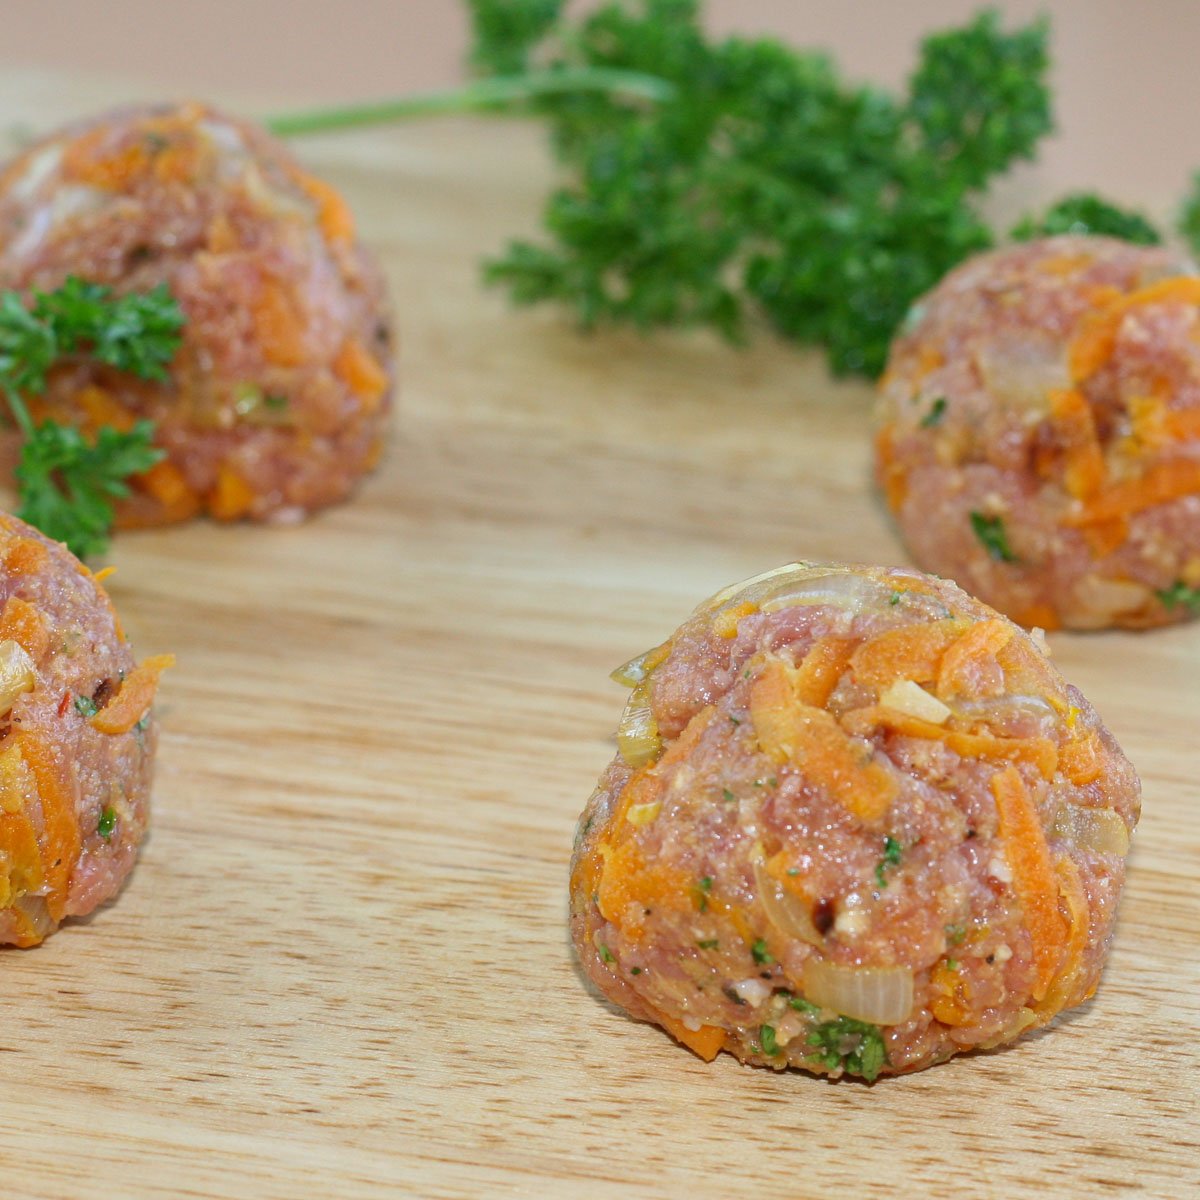 Uncooked meatballs made with on wood board.